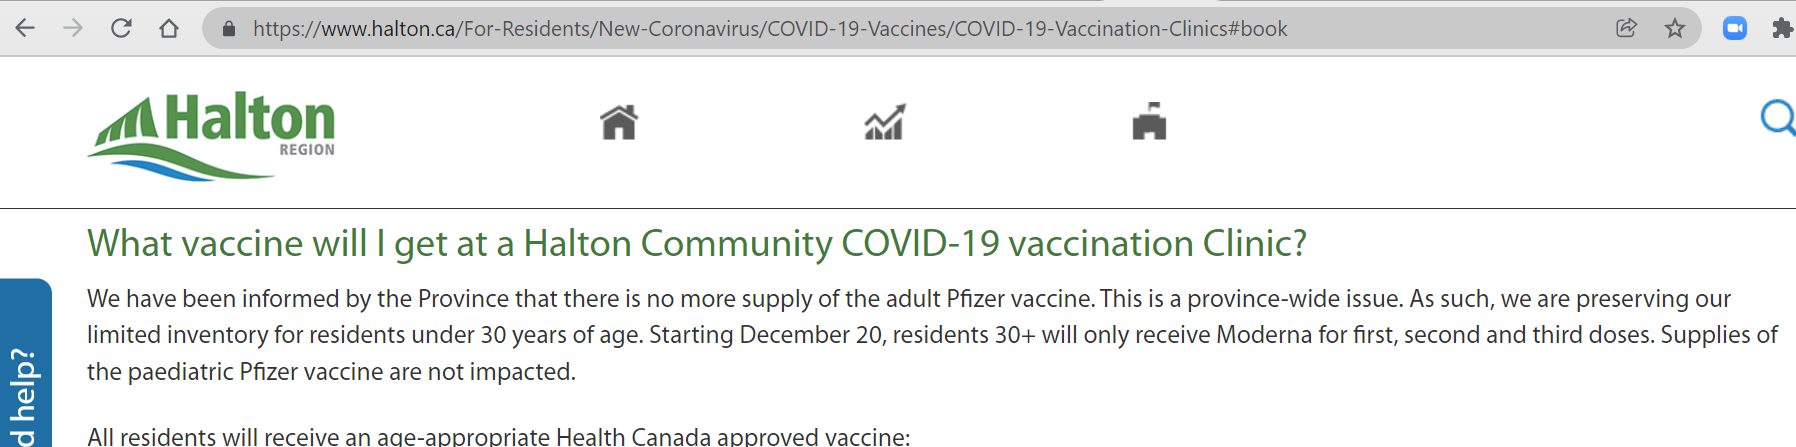 Screenshot from January 7, 2022 | There is a limited supply of adult-dose Pfizer vaccine according to the Halton Region vaccine booking site.